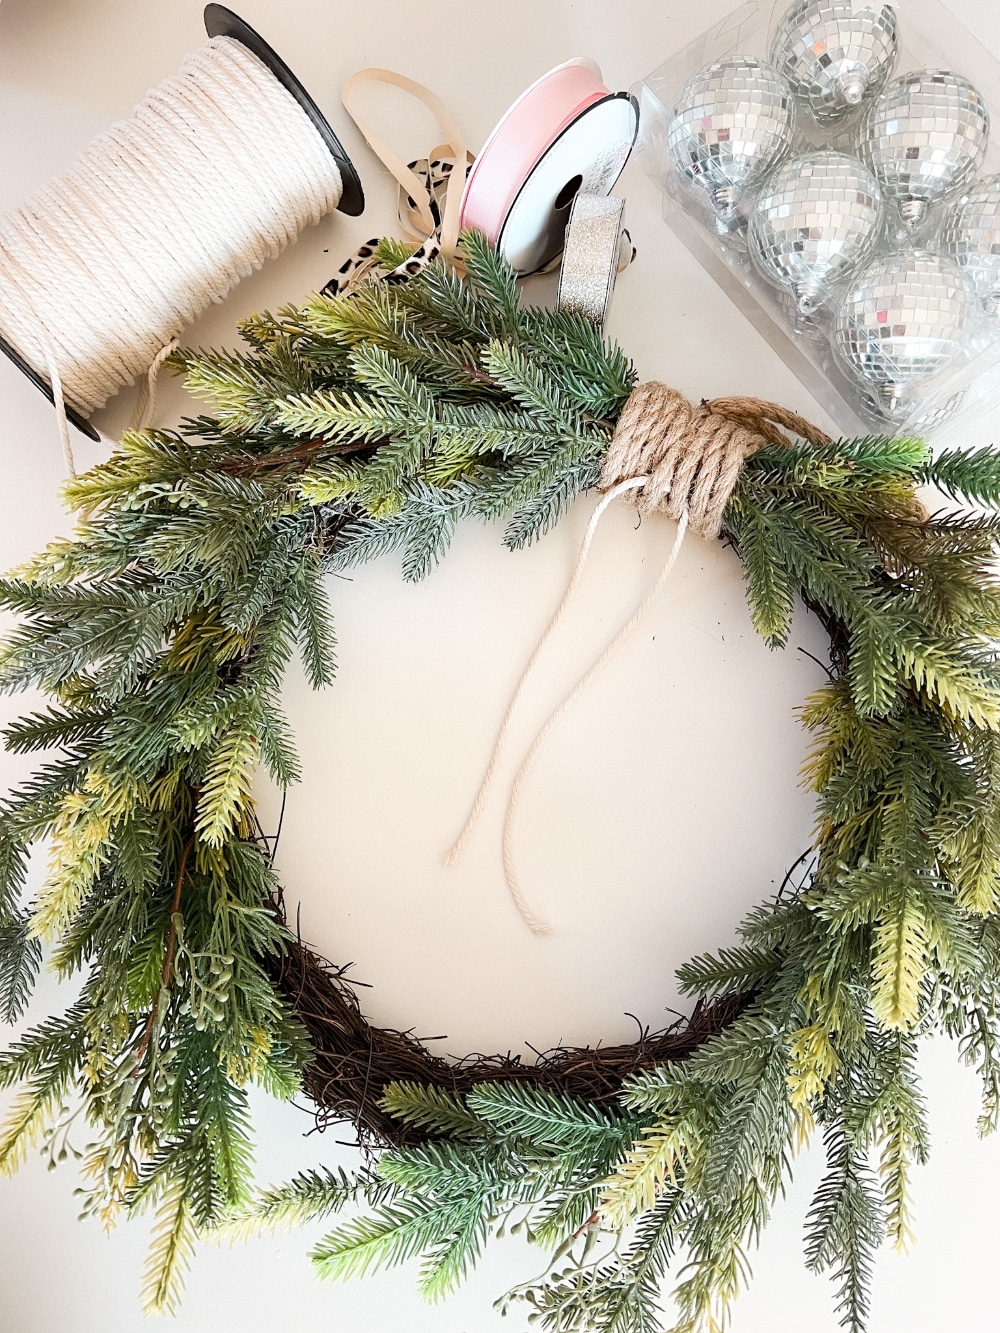 Holiday Evergreen Disco Ball Wreath. Celebrate the holidays with this sparkly, festive disco ball wreath. It's also great to keep up through New Year's Eve!